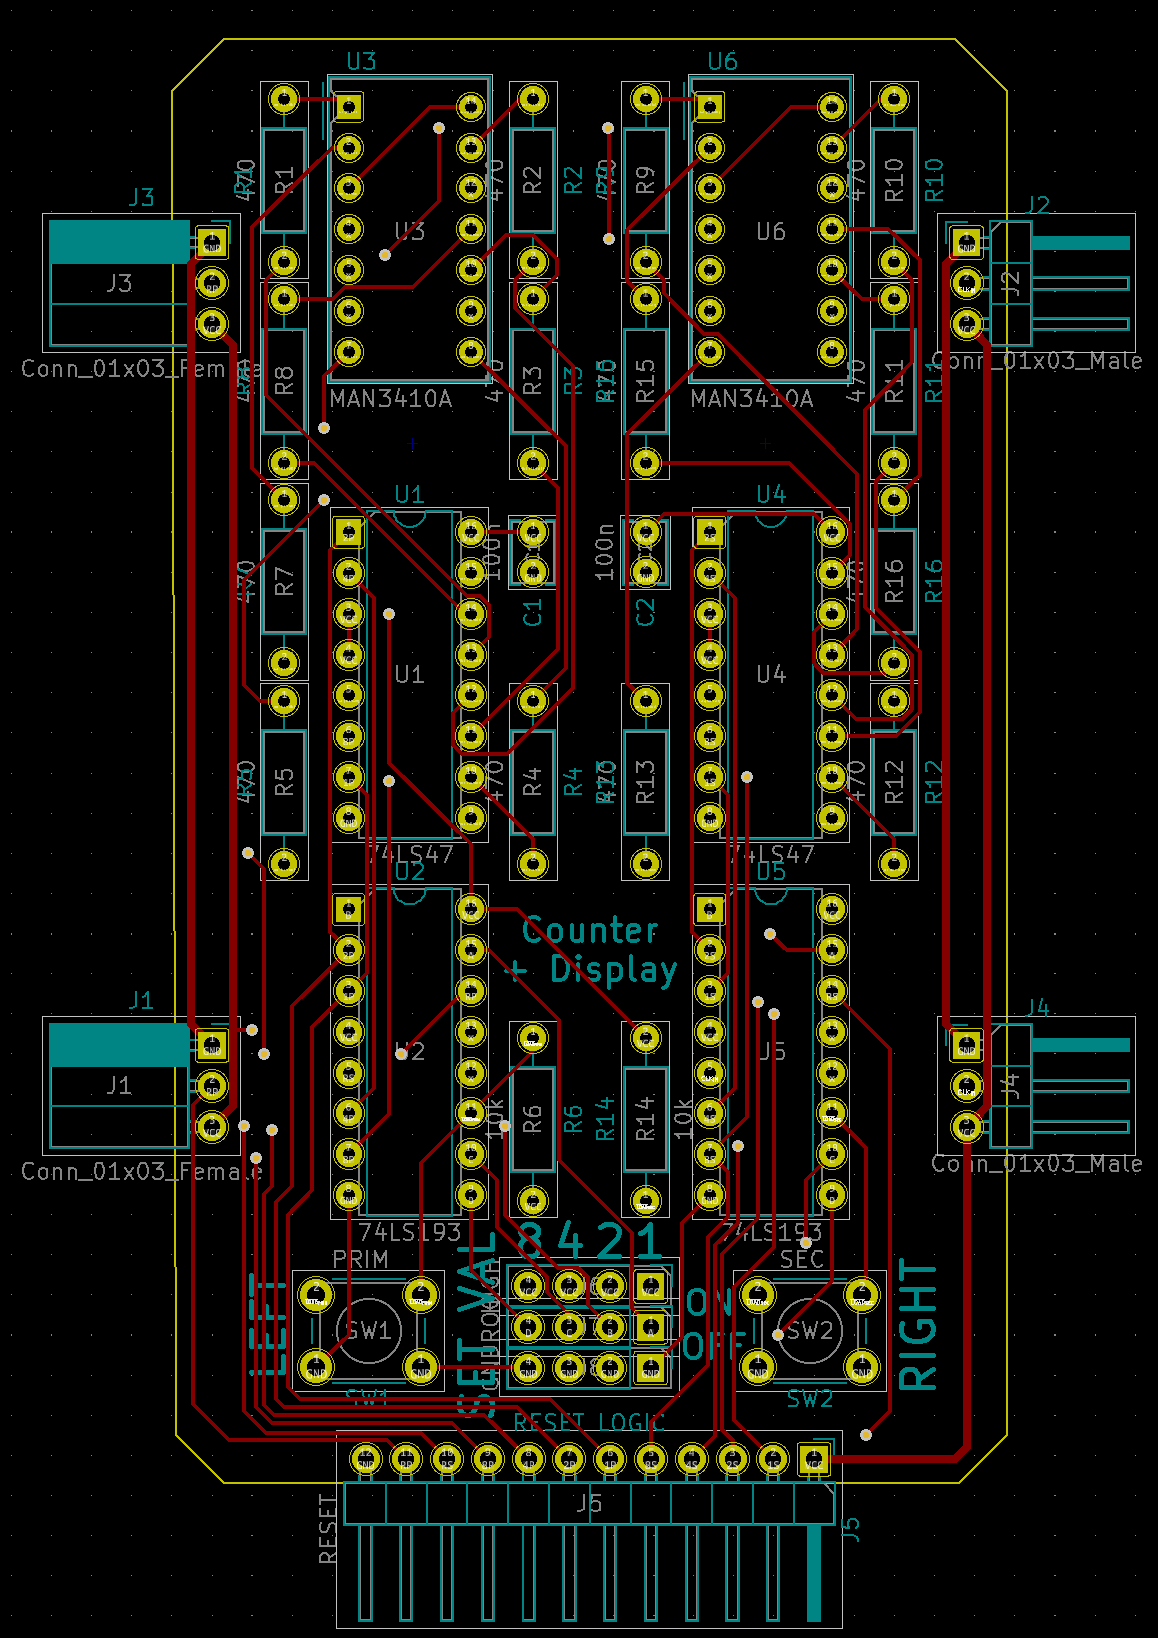 Top layout of the display module